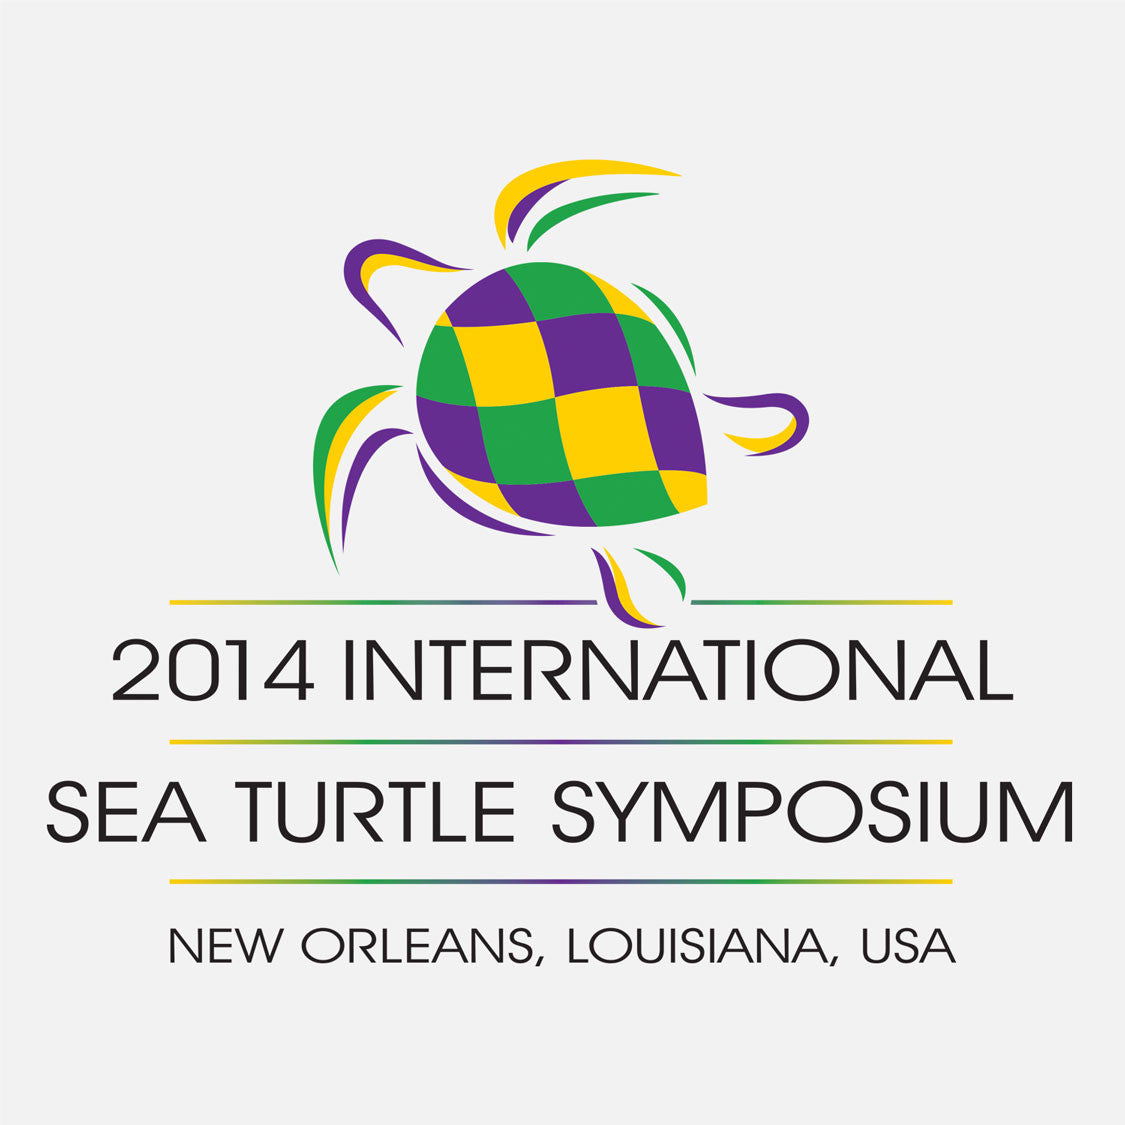 34th annual sea turtle symposium held in New Orleans, Louisianna. The logo depicts a Mardi Gras style sea turtle.